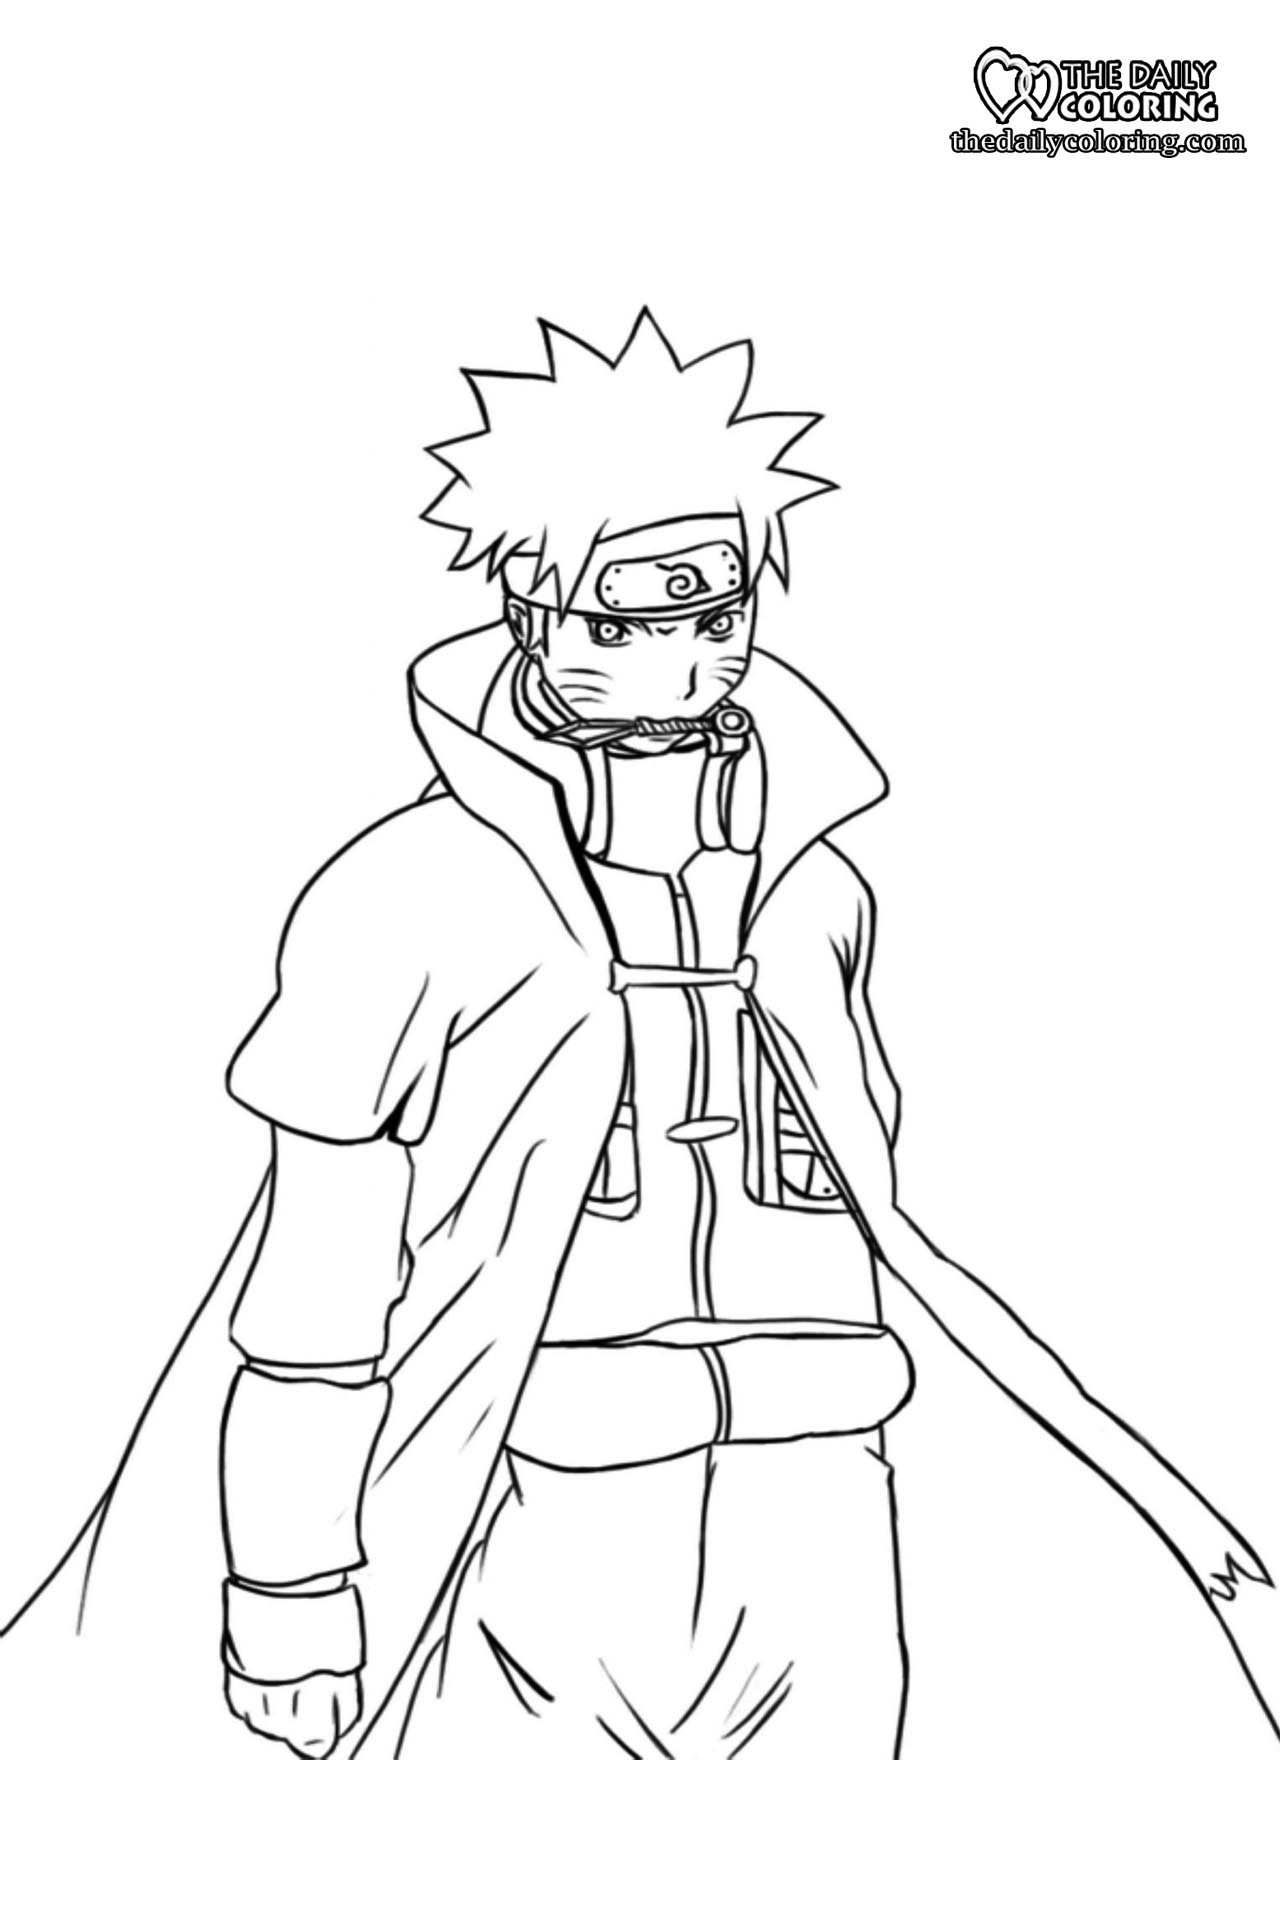 Naruto Coloring Pages   The Daily Coloring